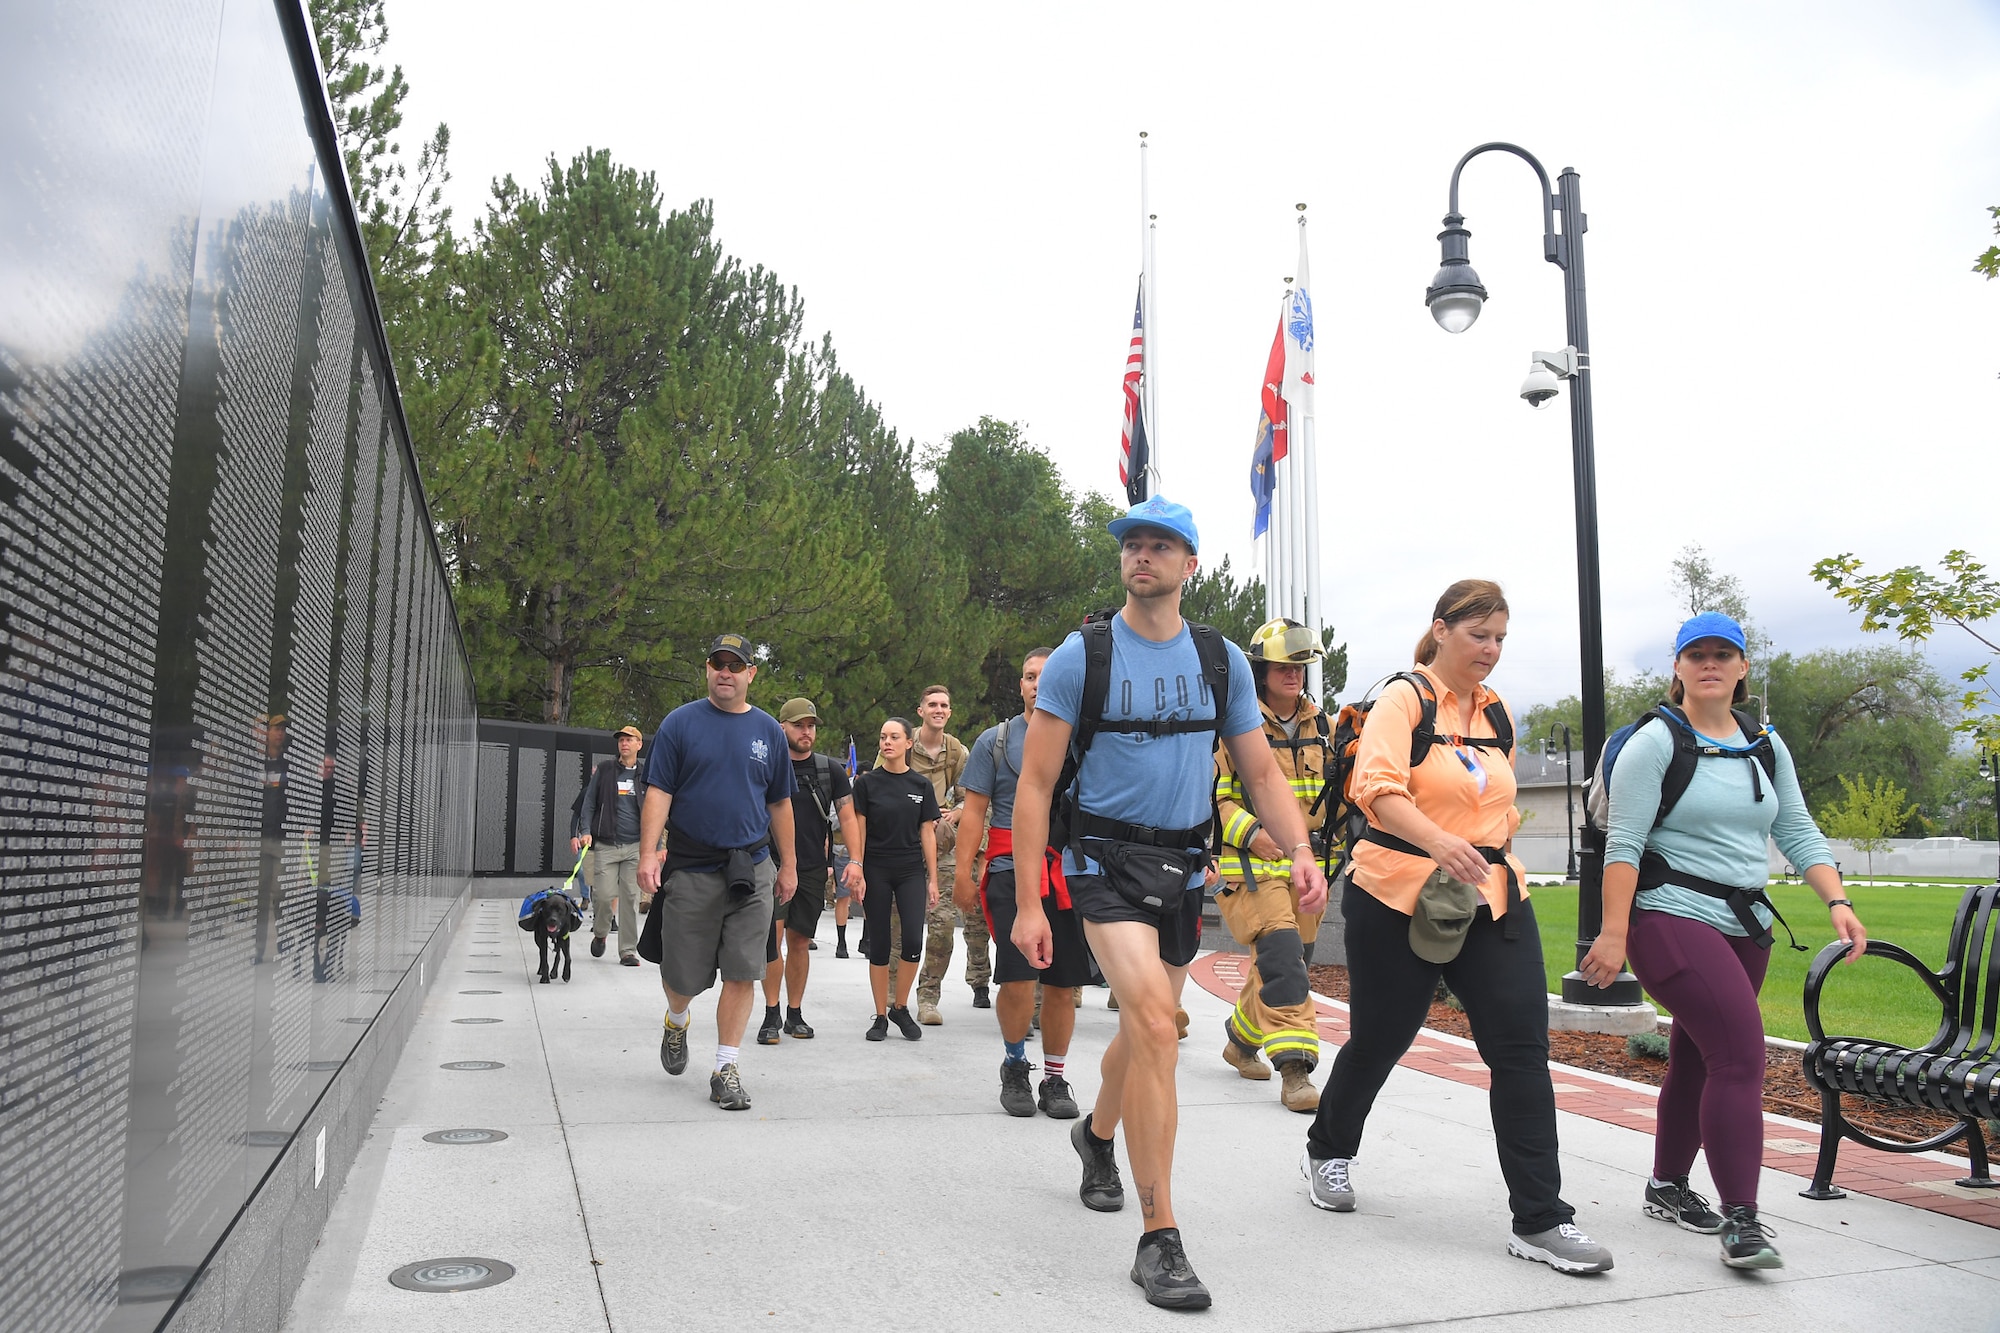 9/11 Memorial Ruck March participants, stride past the Vietnam War Memorial in Layton, Utah, Sept. 11, 2019. The Ruck March event was co-sponsored by Hill Air Force Base first responders and fire and police departments from Kaysville and Layton, to honor and remember the fallen from the events of Sept. 11, 2001. (U.S. Air Force photo by Todd Cromar)